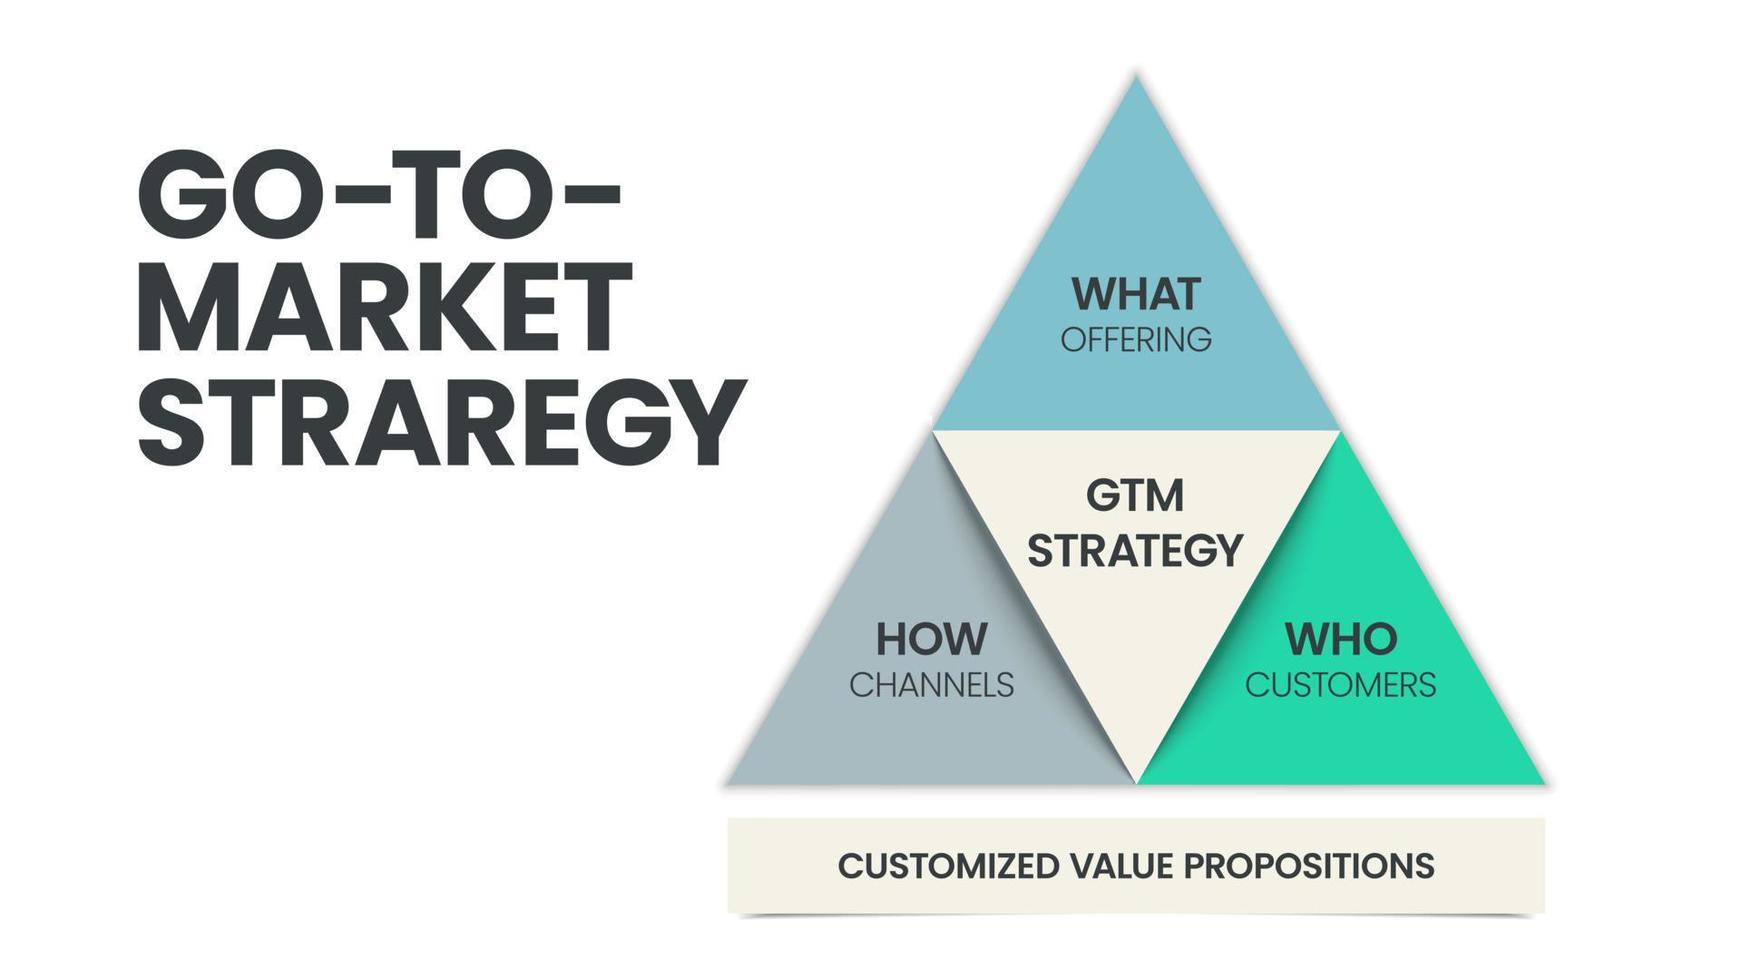 GTM or Go-To-Market strategy and plan pyramid infographic template has 3 steps to analyze such as What - offering, Who - customers and How - channels. Business and marketing slide for presentation. vector